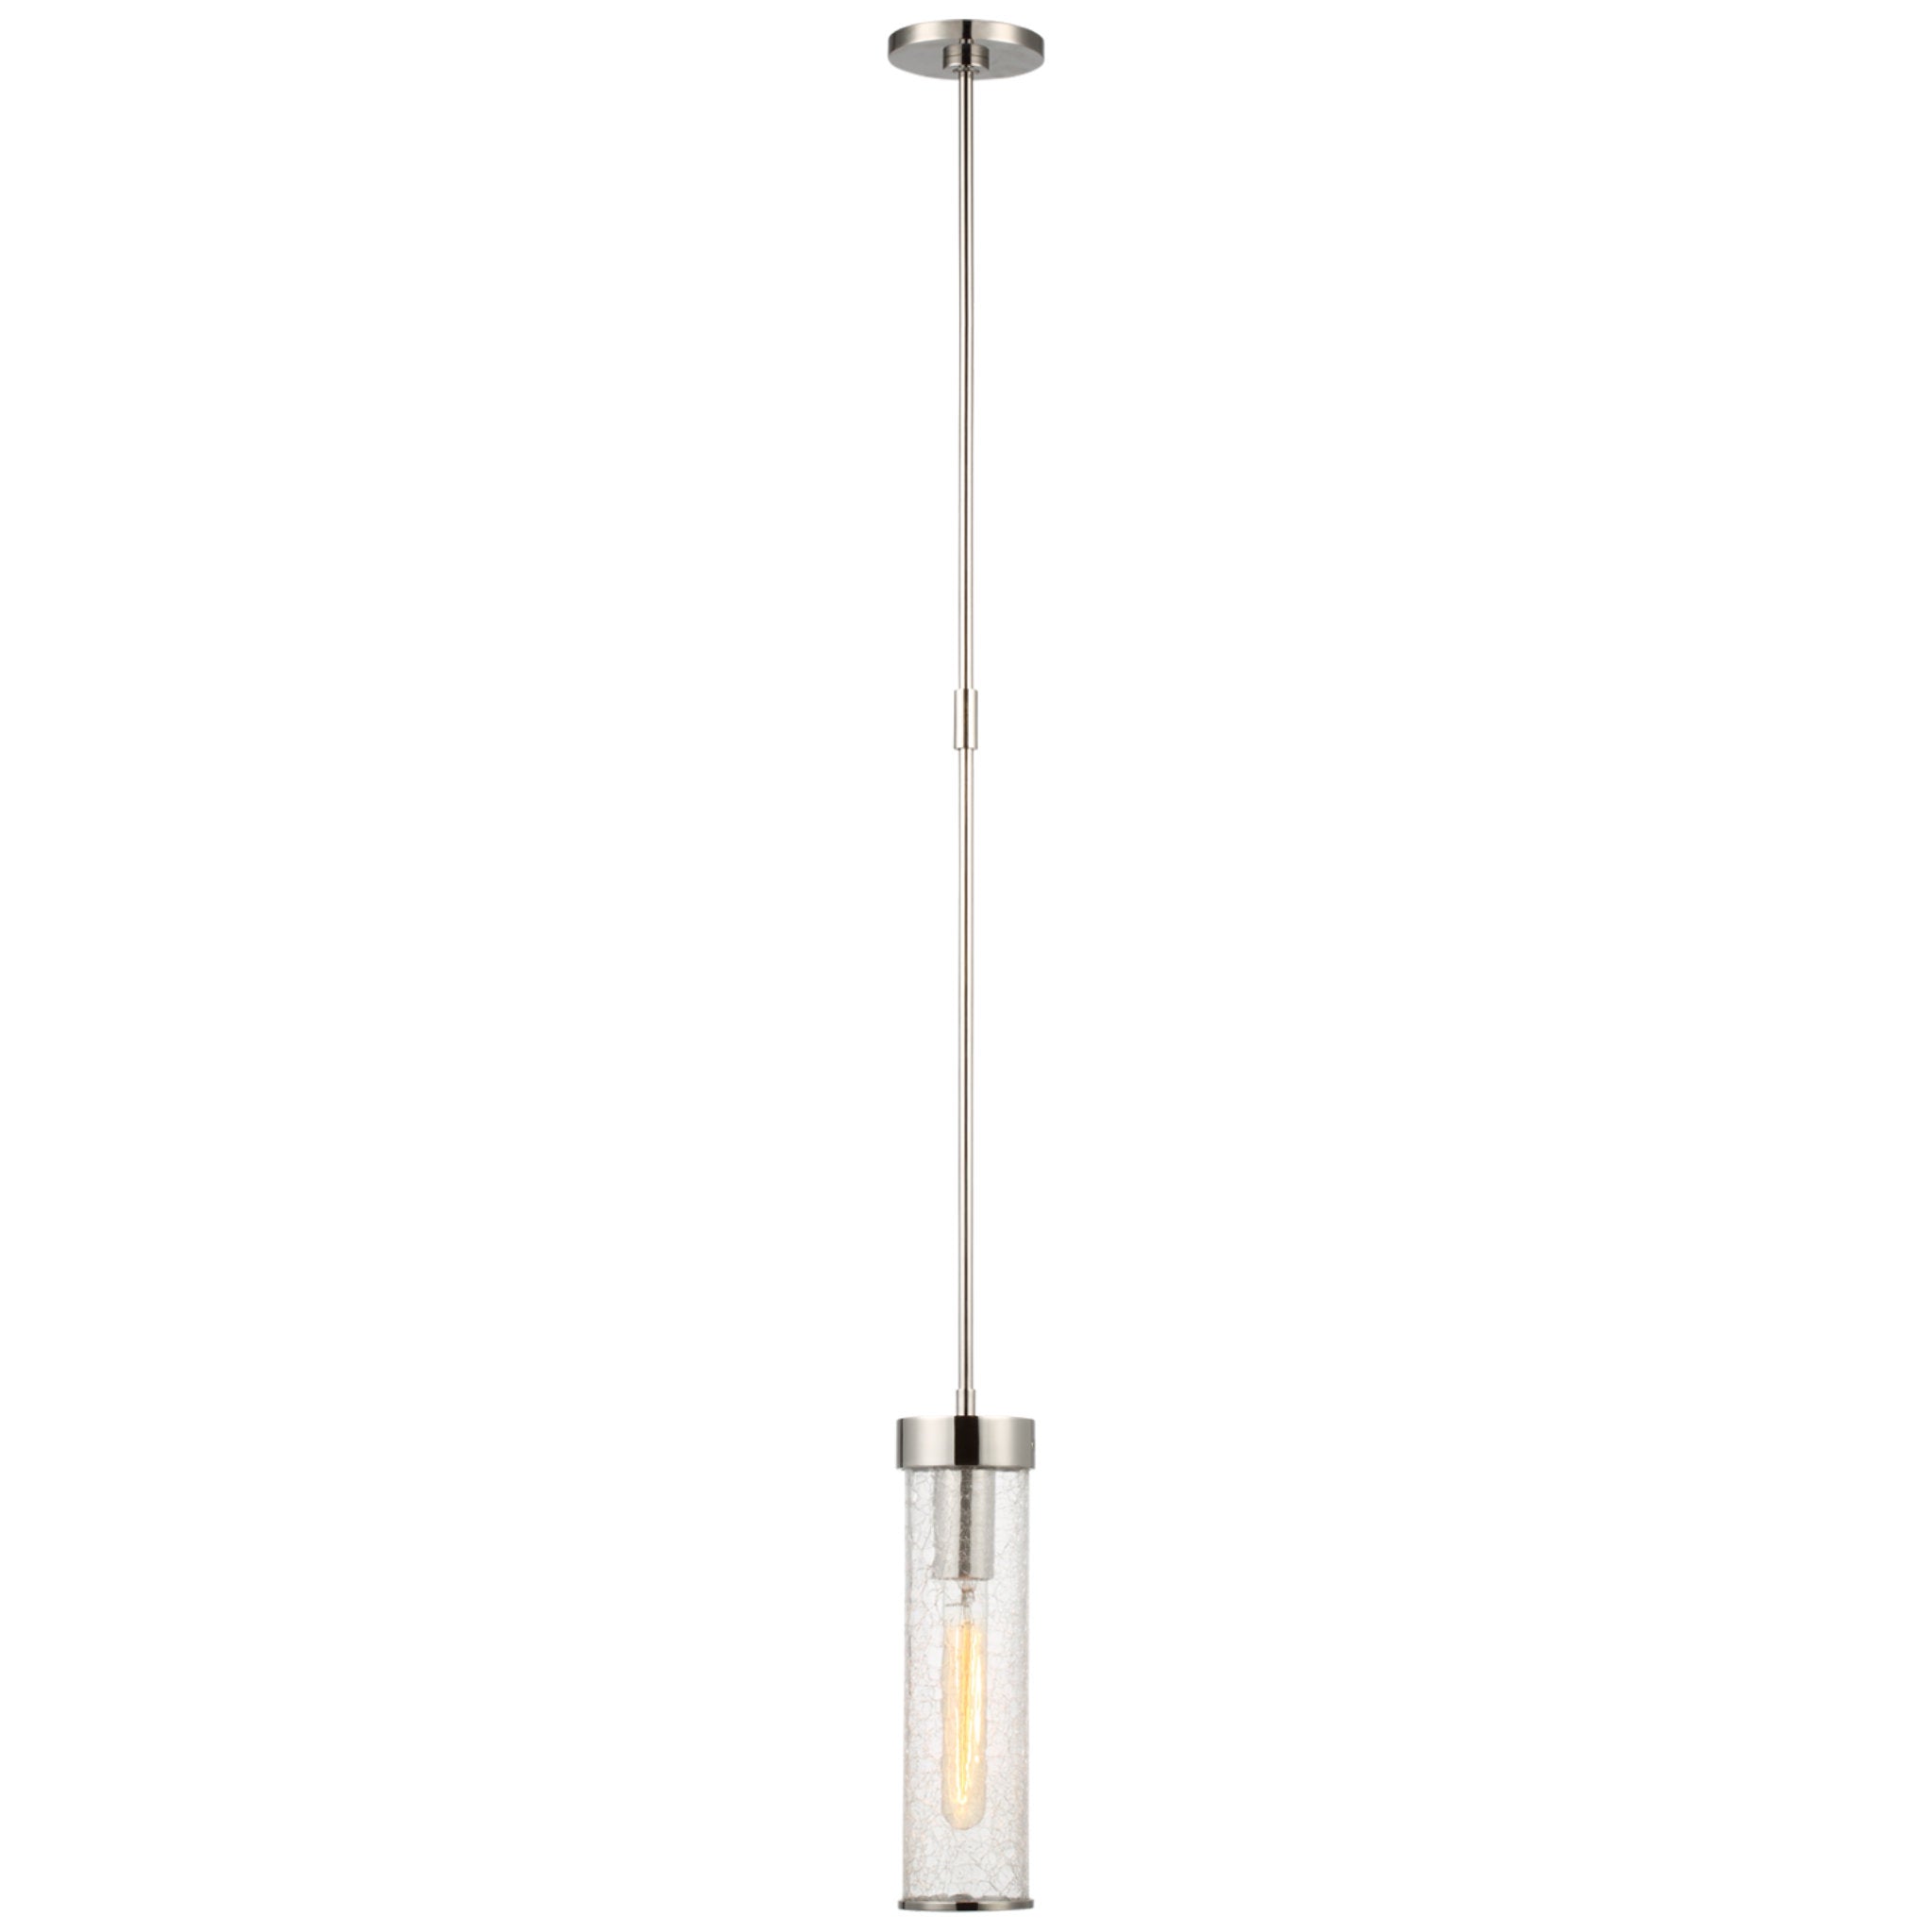 Kelly Wearstler Liaison Short Pendant in Polished Nickel with Crackle Glass